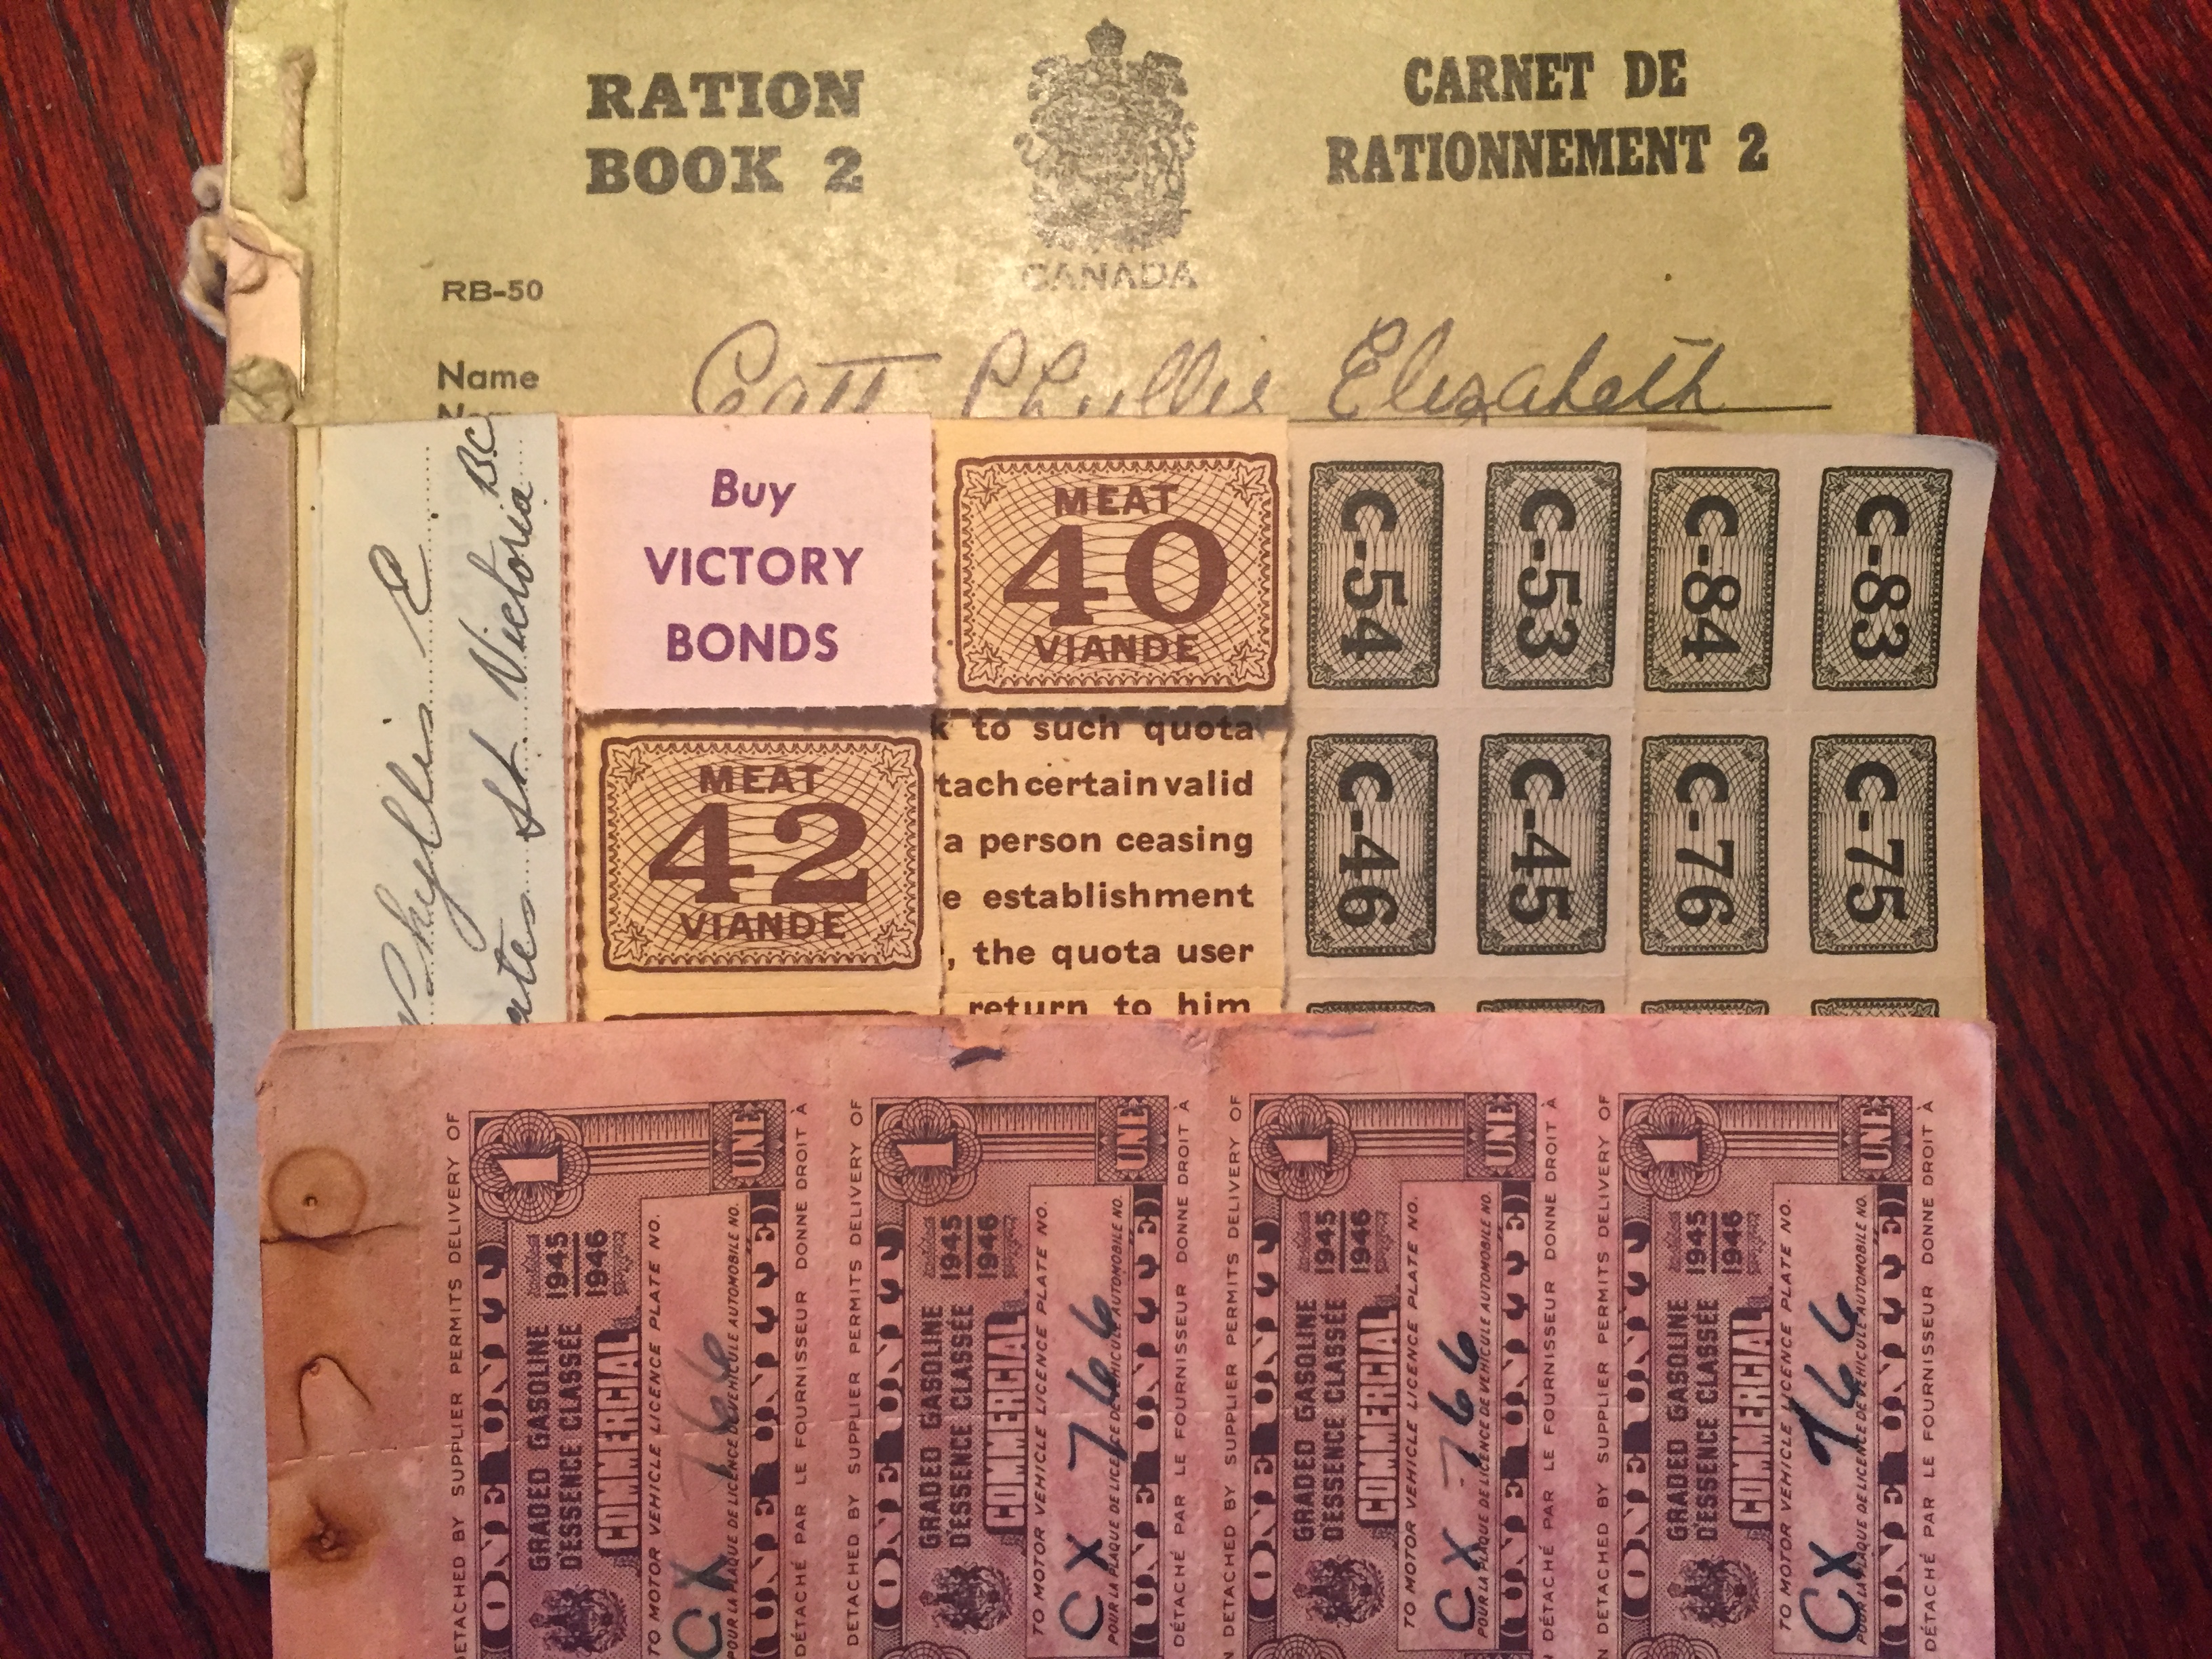 A ration book from World War 2 with the name “Catt, Phyllis Elizabeth” contains ration stamps. One of the stamps reads “Buy Victory Bonds”.